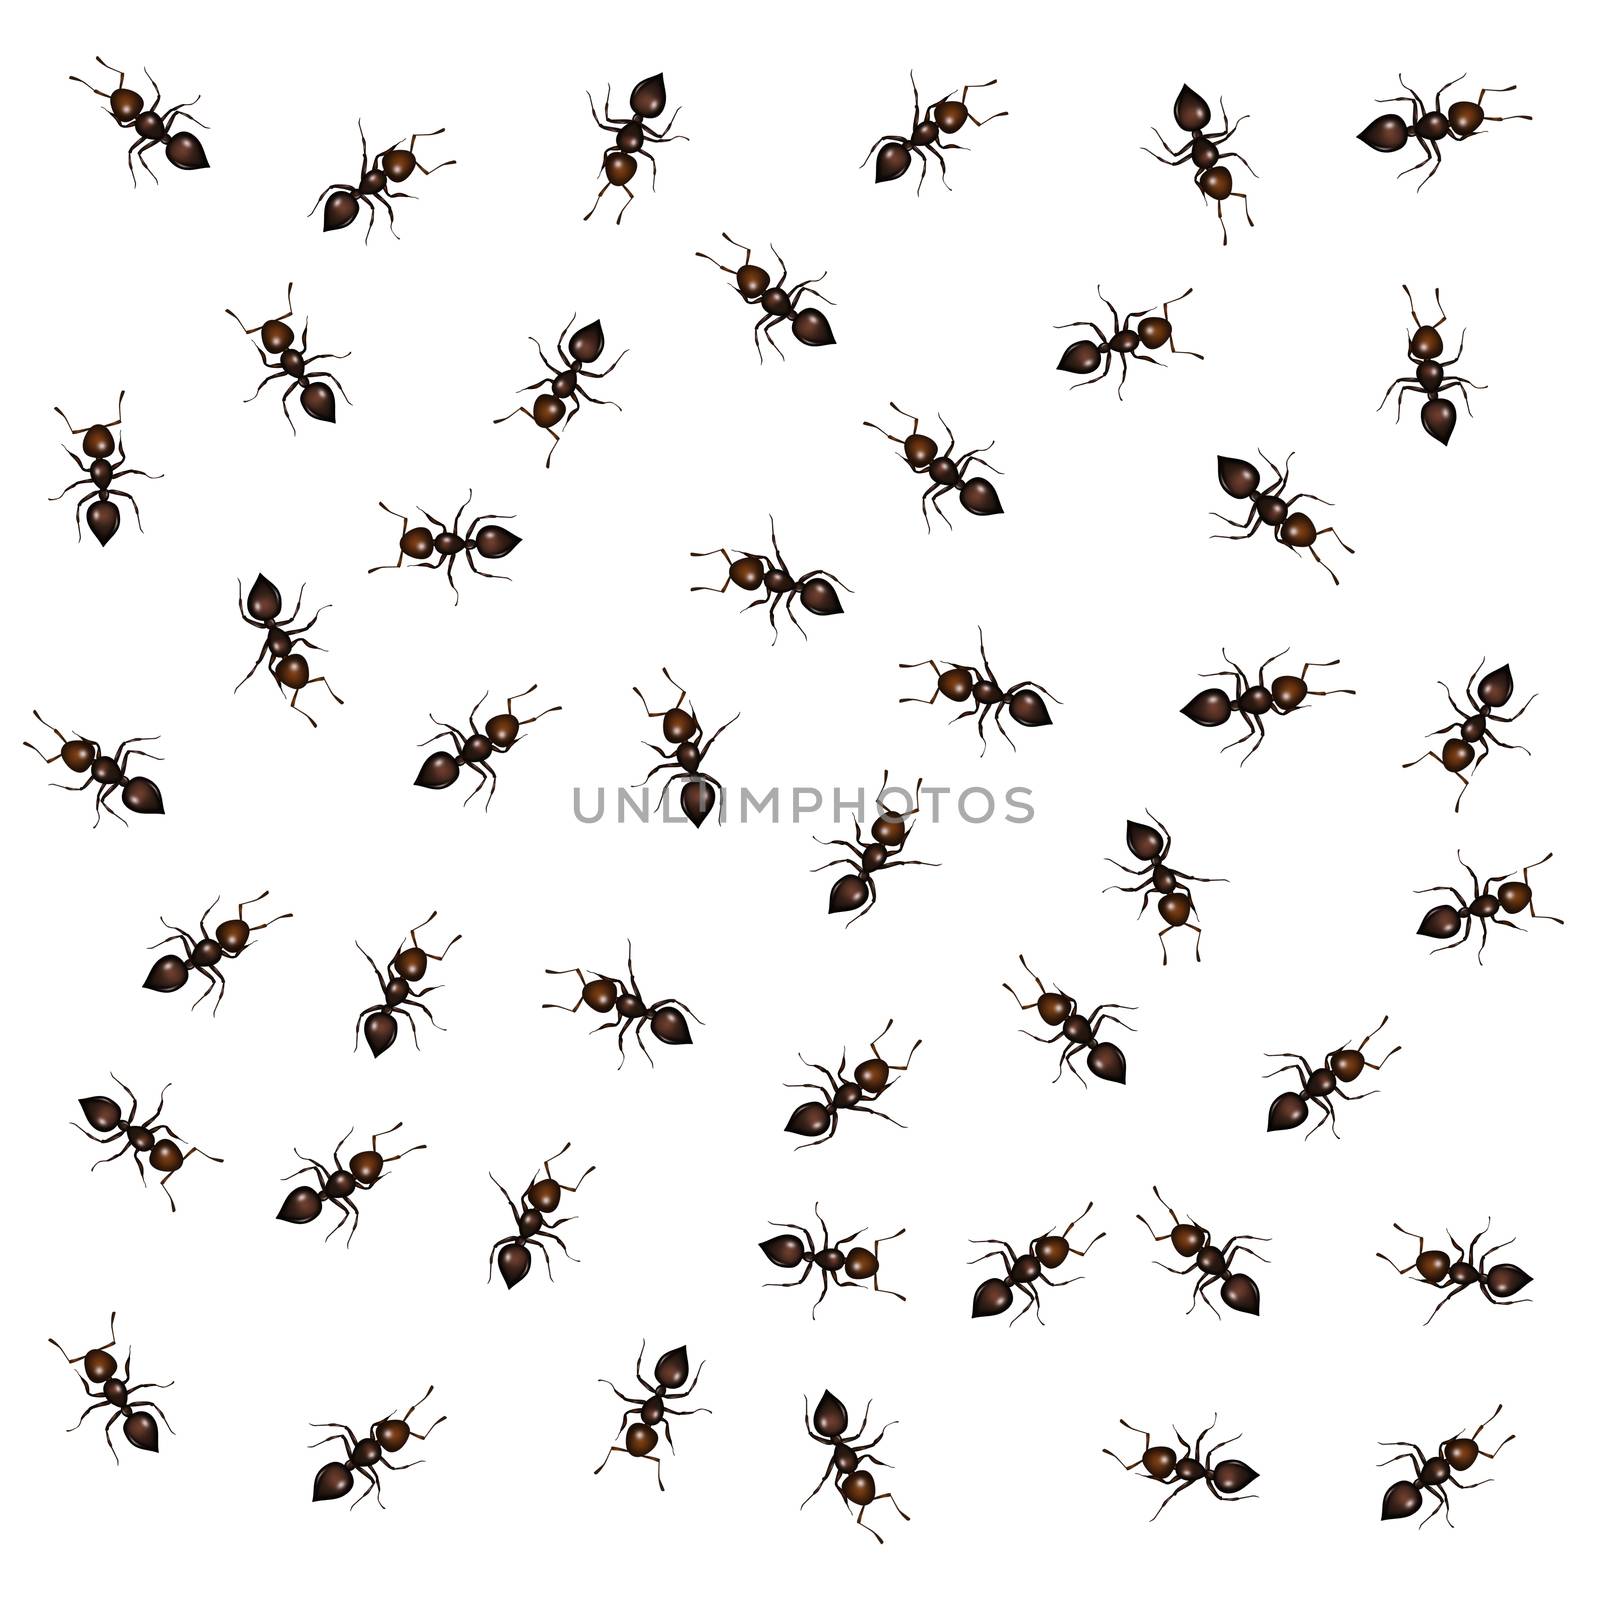 ants on white background by adrenalina